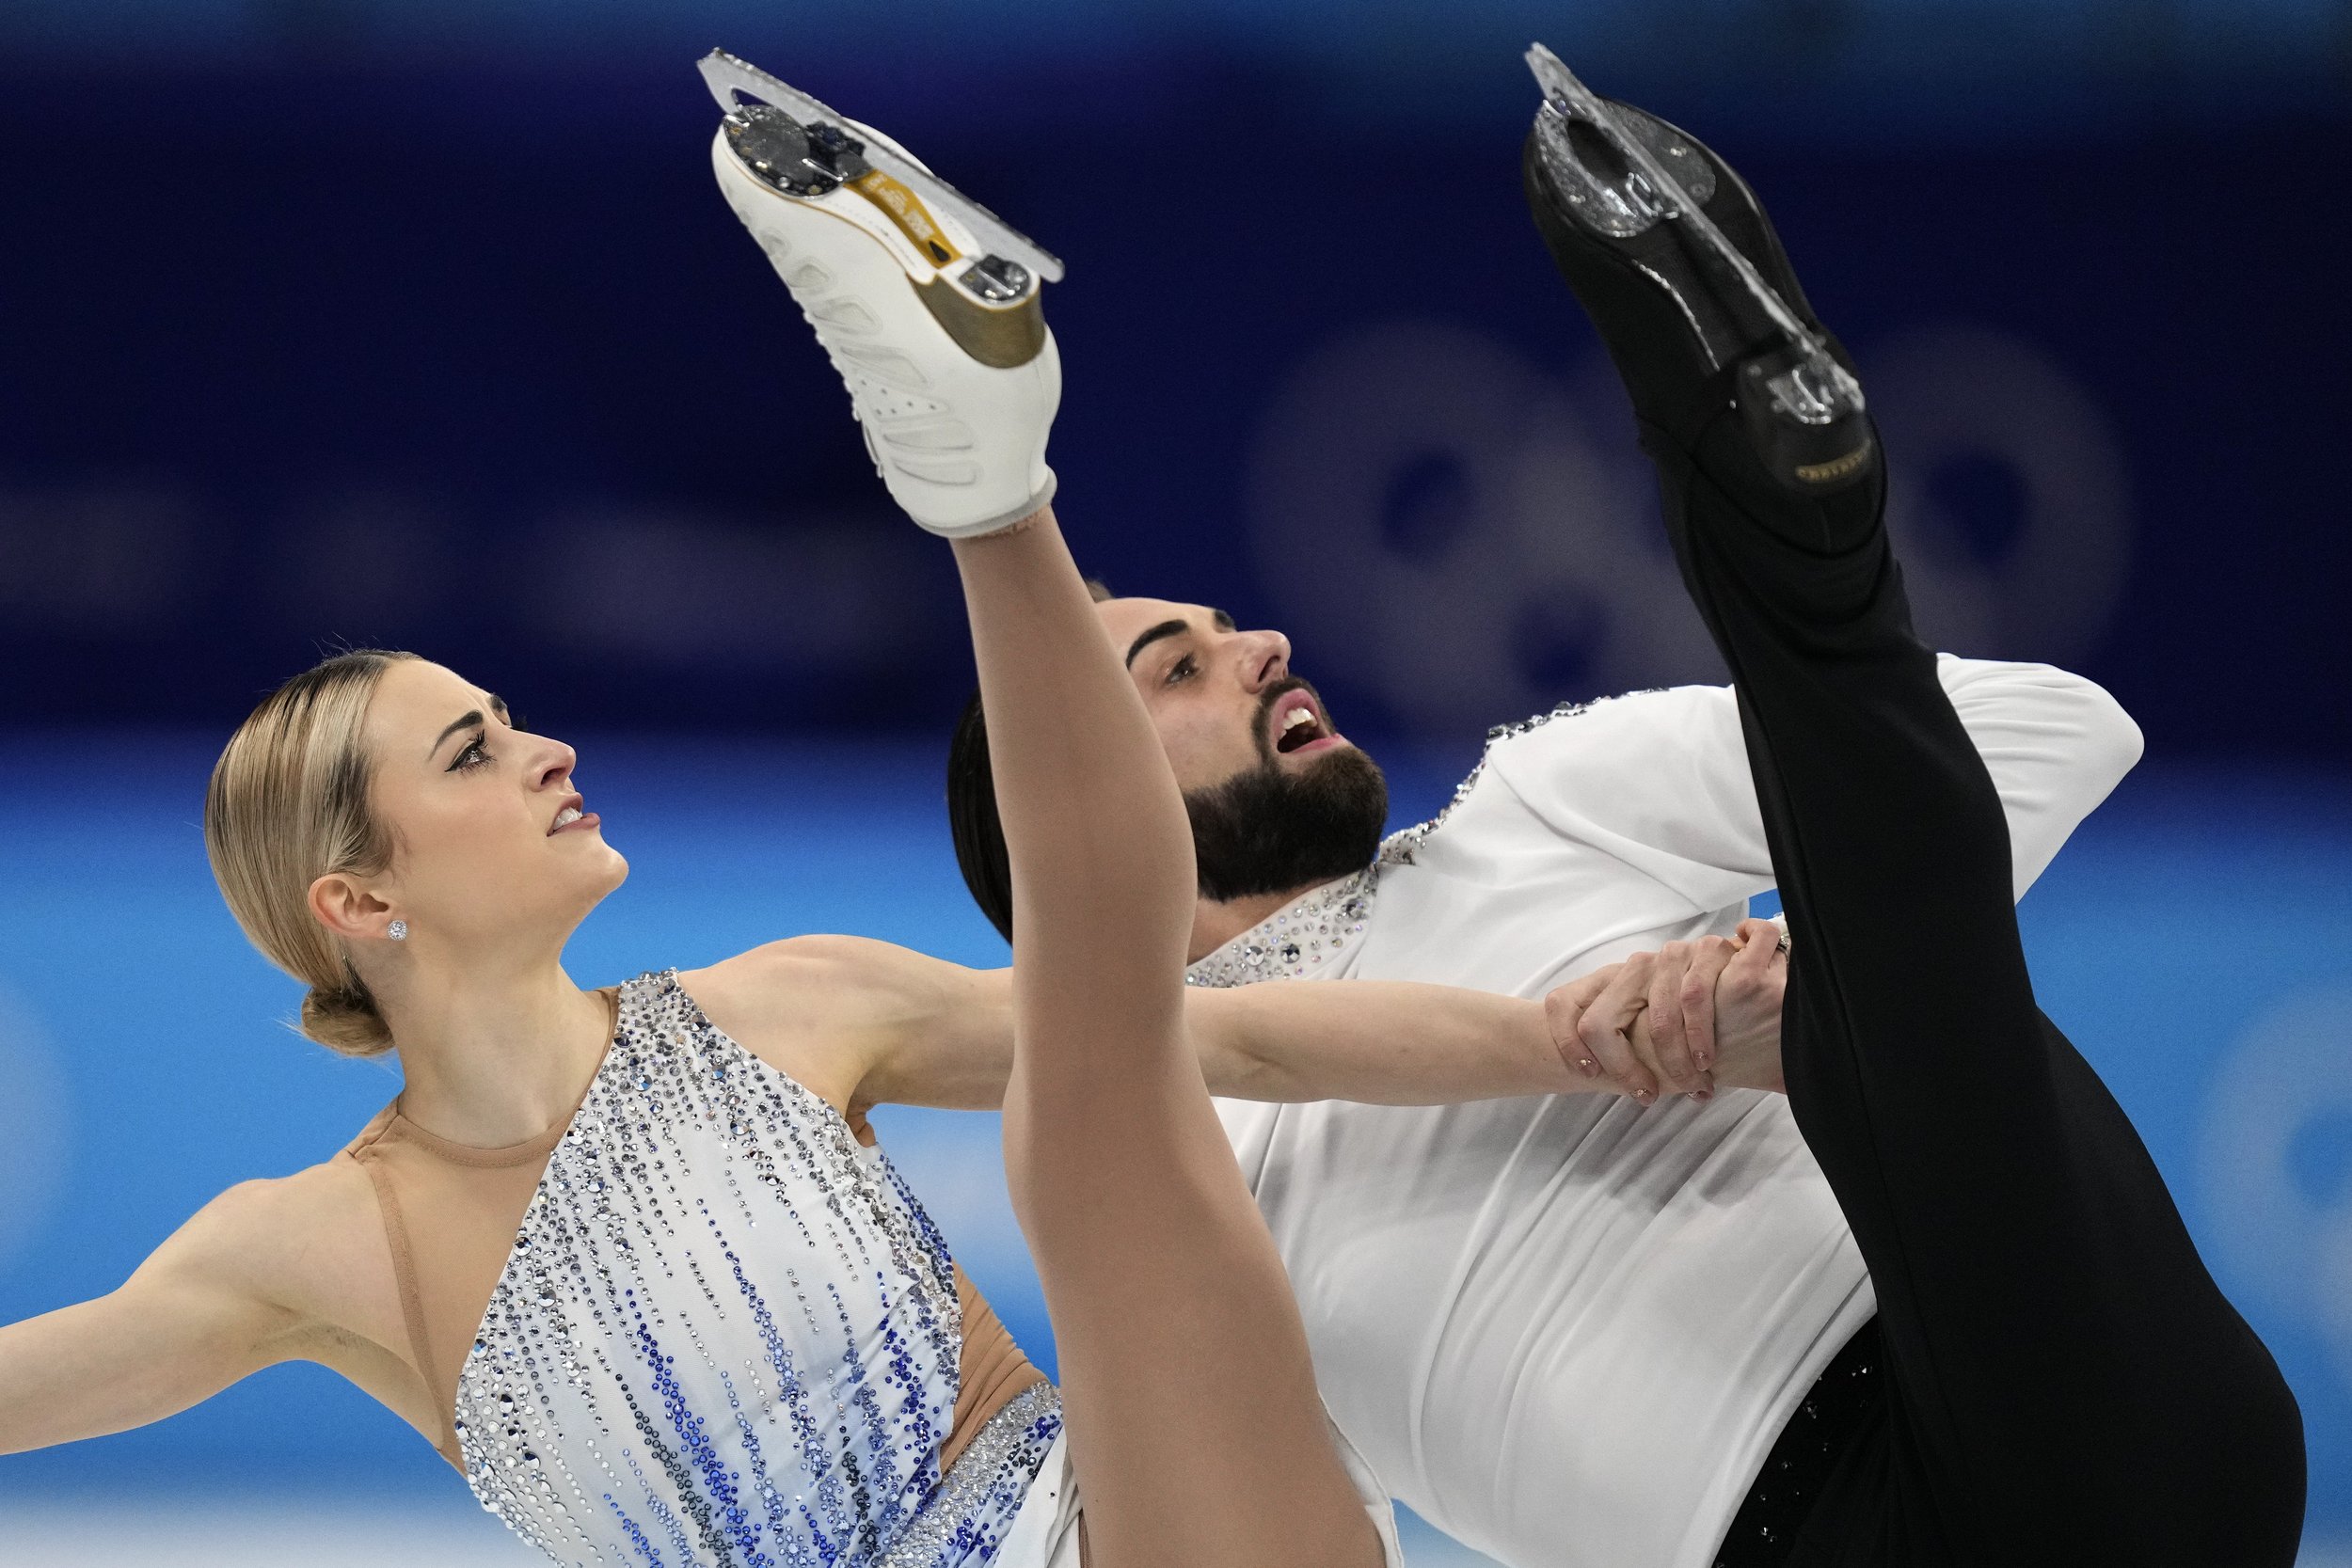  Ashley Cain-Gribble and Timothy Leduc, of the United States, compete in the pairs short program during the figure skating competition at the 2022 Winter Olympics, Friday, Feb. 18, 2022, in Beijing. (AP Photo/Bernat Armangue) 